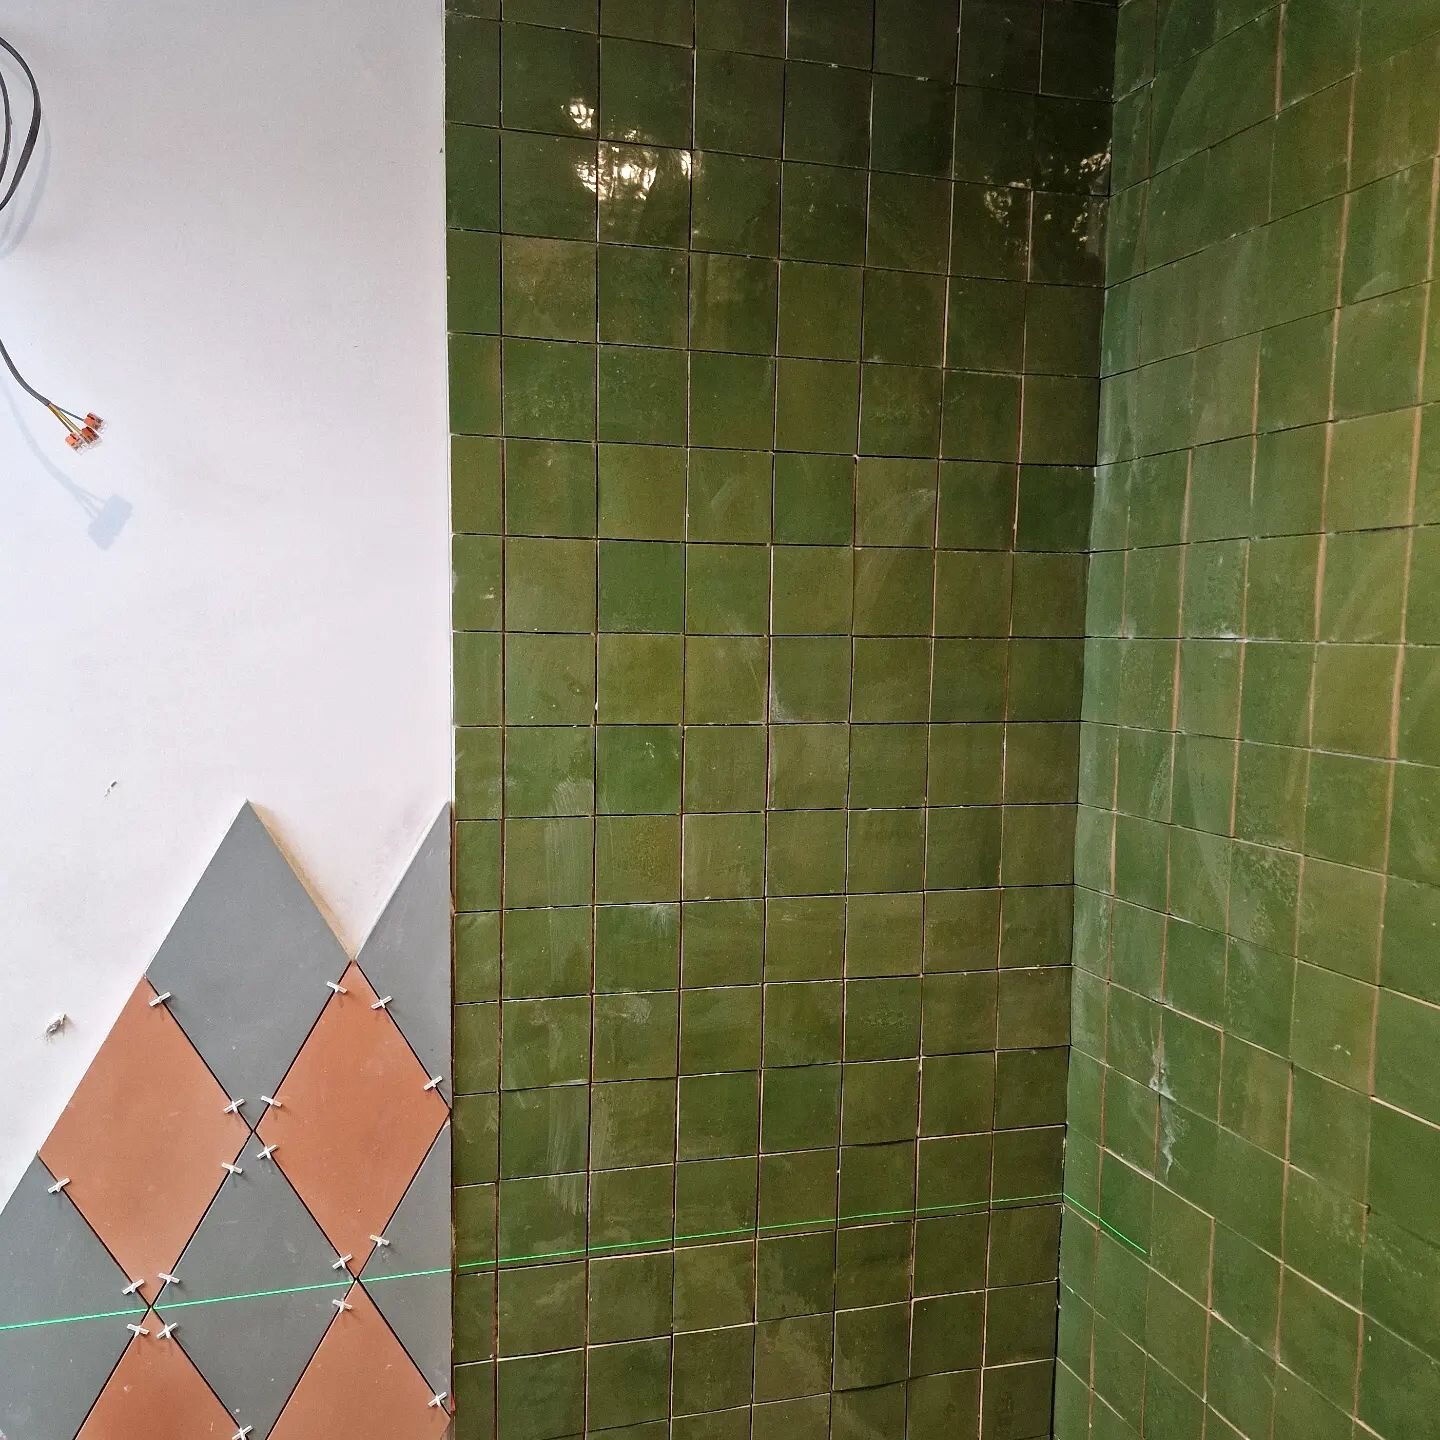 A loft bathroom in progress. We love, love tiles. Playing with texture, scale and shape in this small space to give it some character and oomph. 

The loft room adjacent is going to be wrapped in a slightly bonkers floral wallpaper. Can't wait to sha